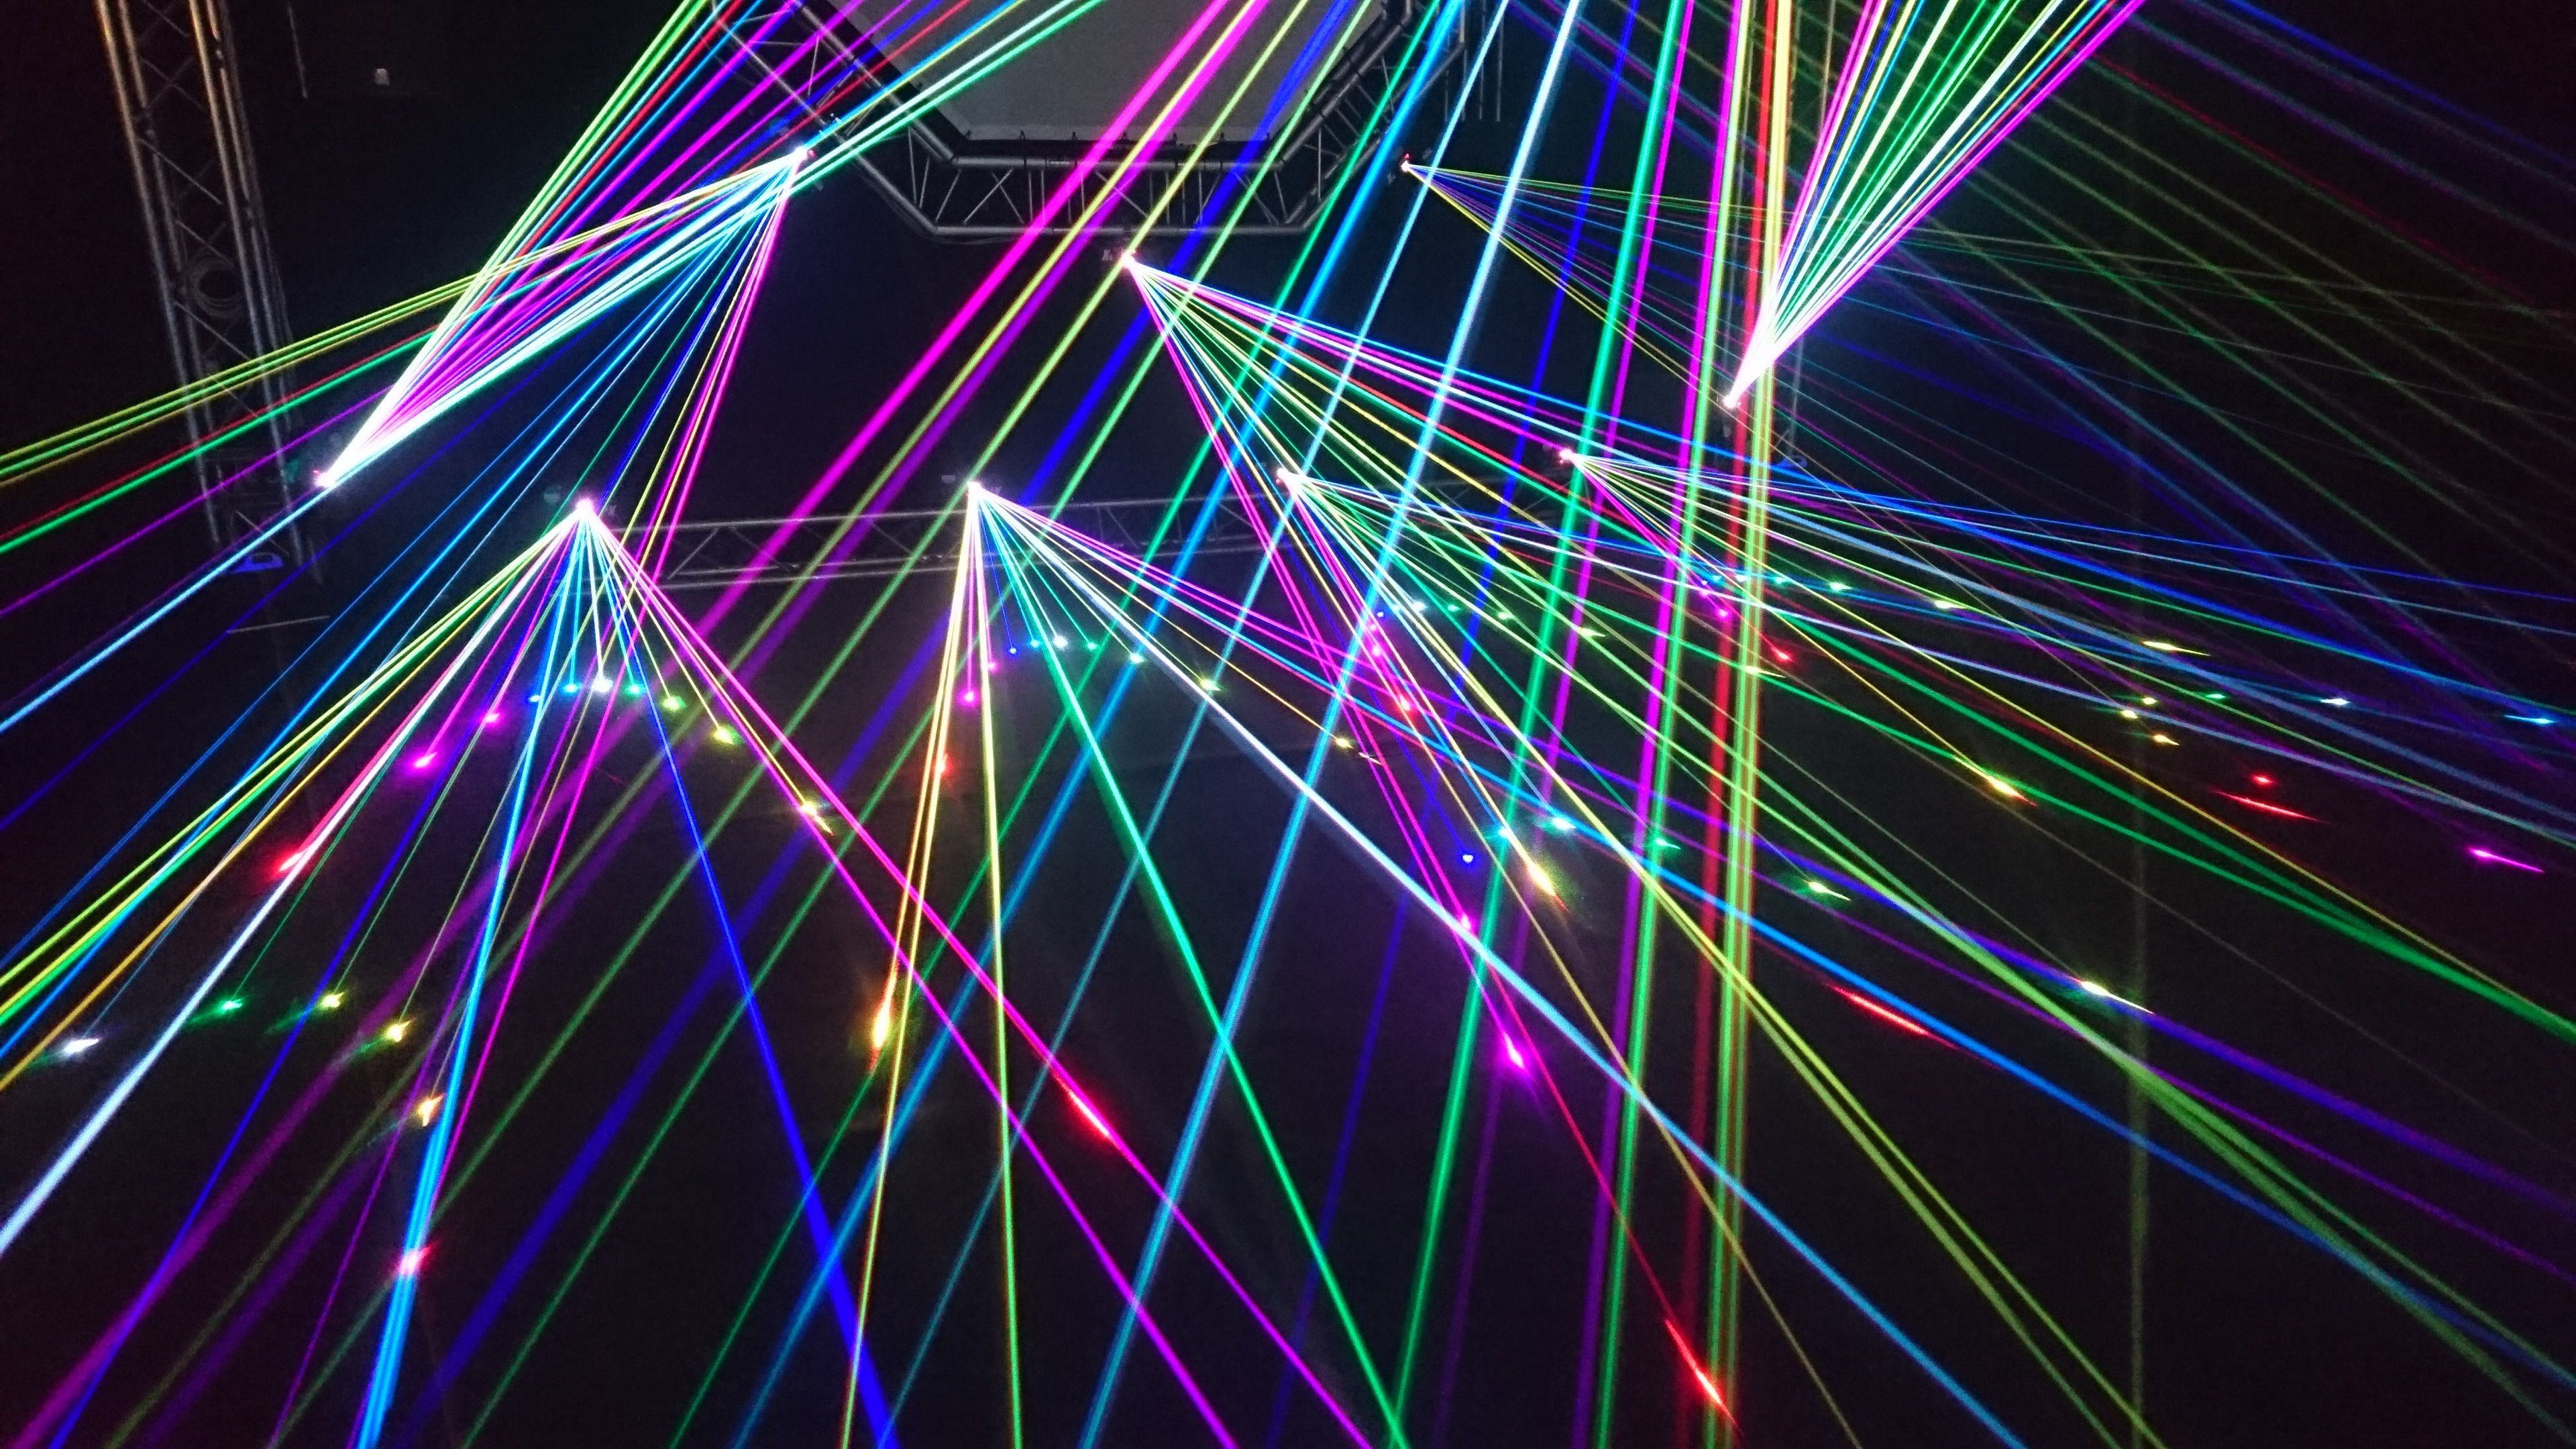 Lasers with their light beams spreading out